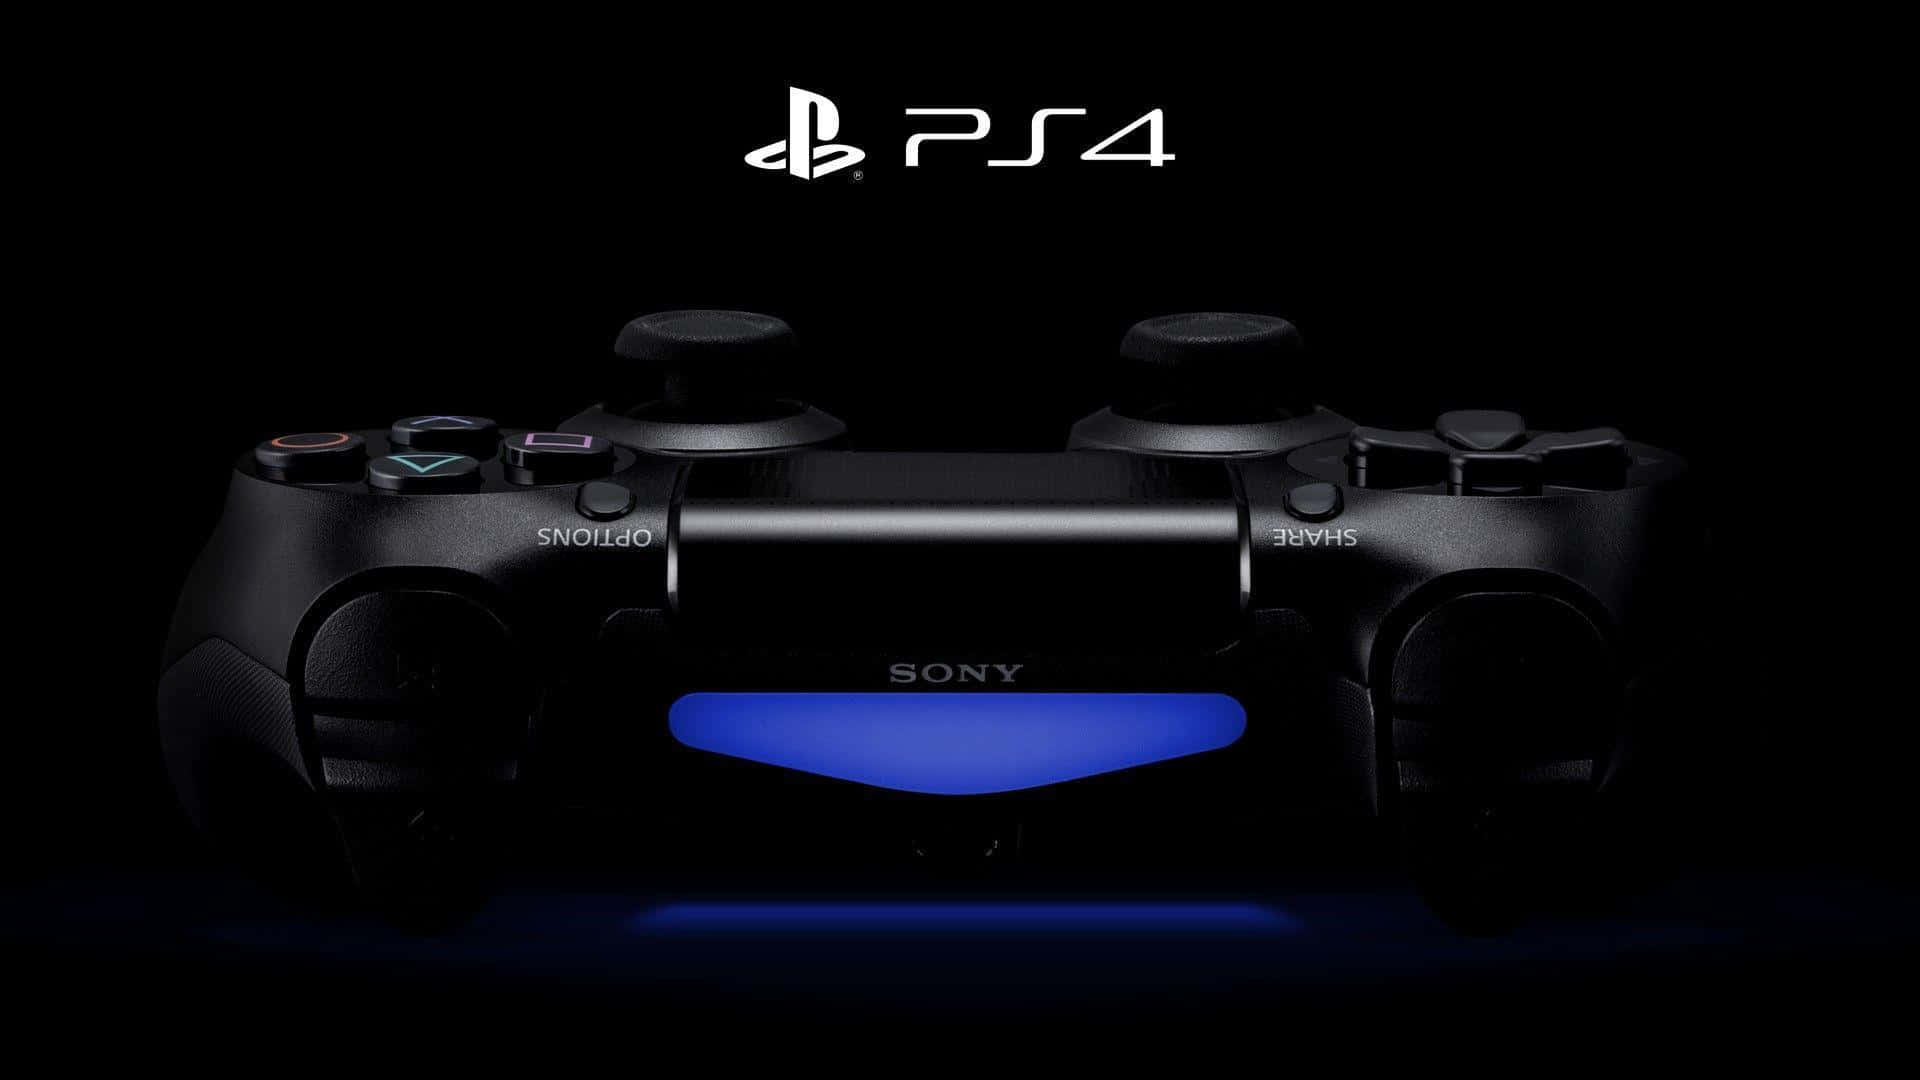 Cool Ps4 With Black Controller With Sony Logo